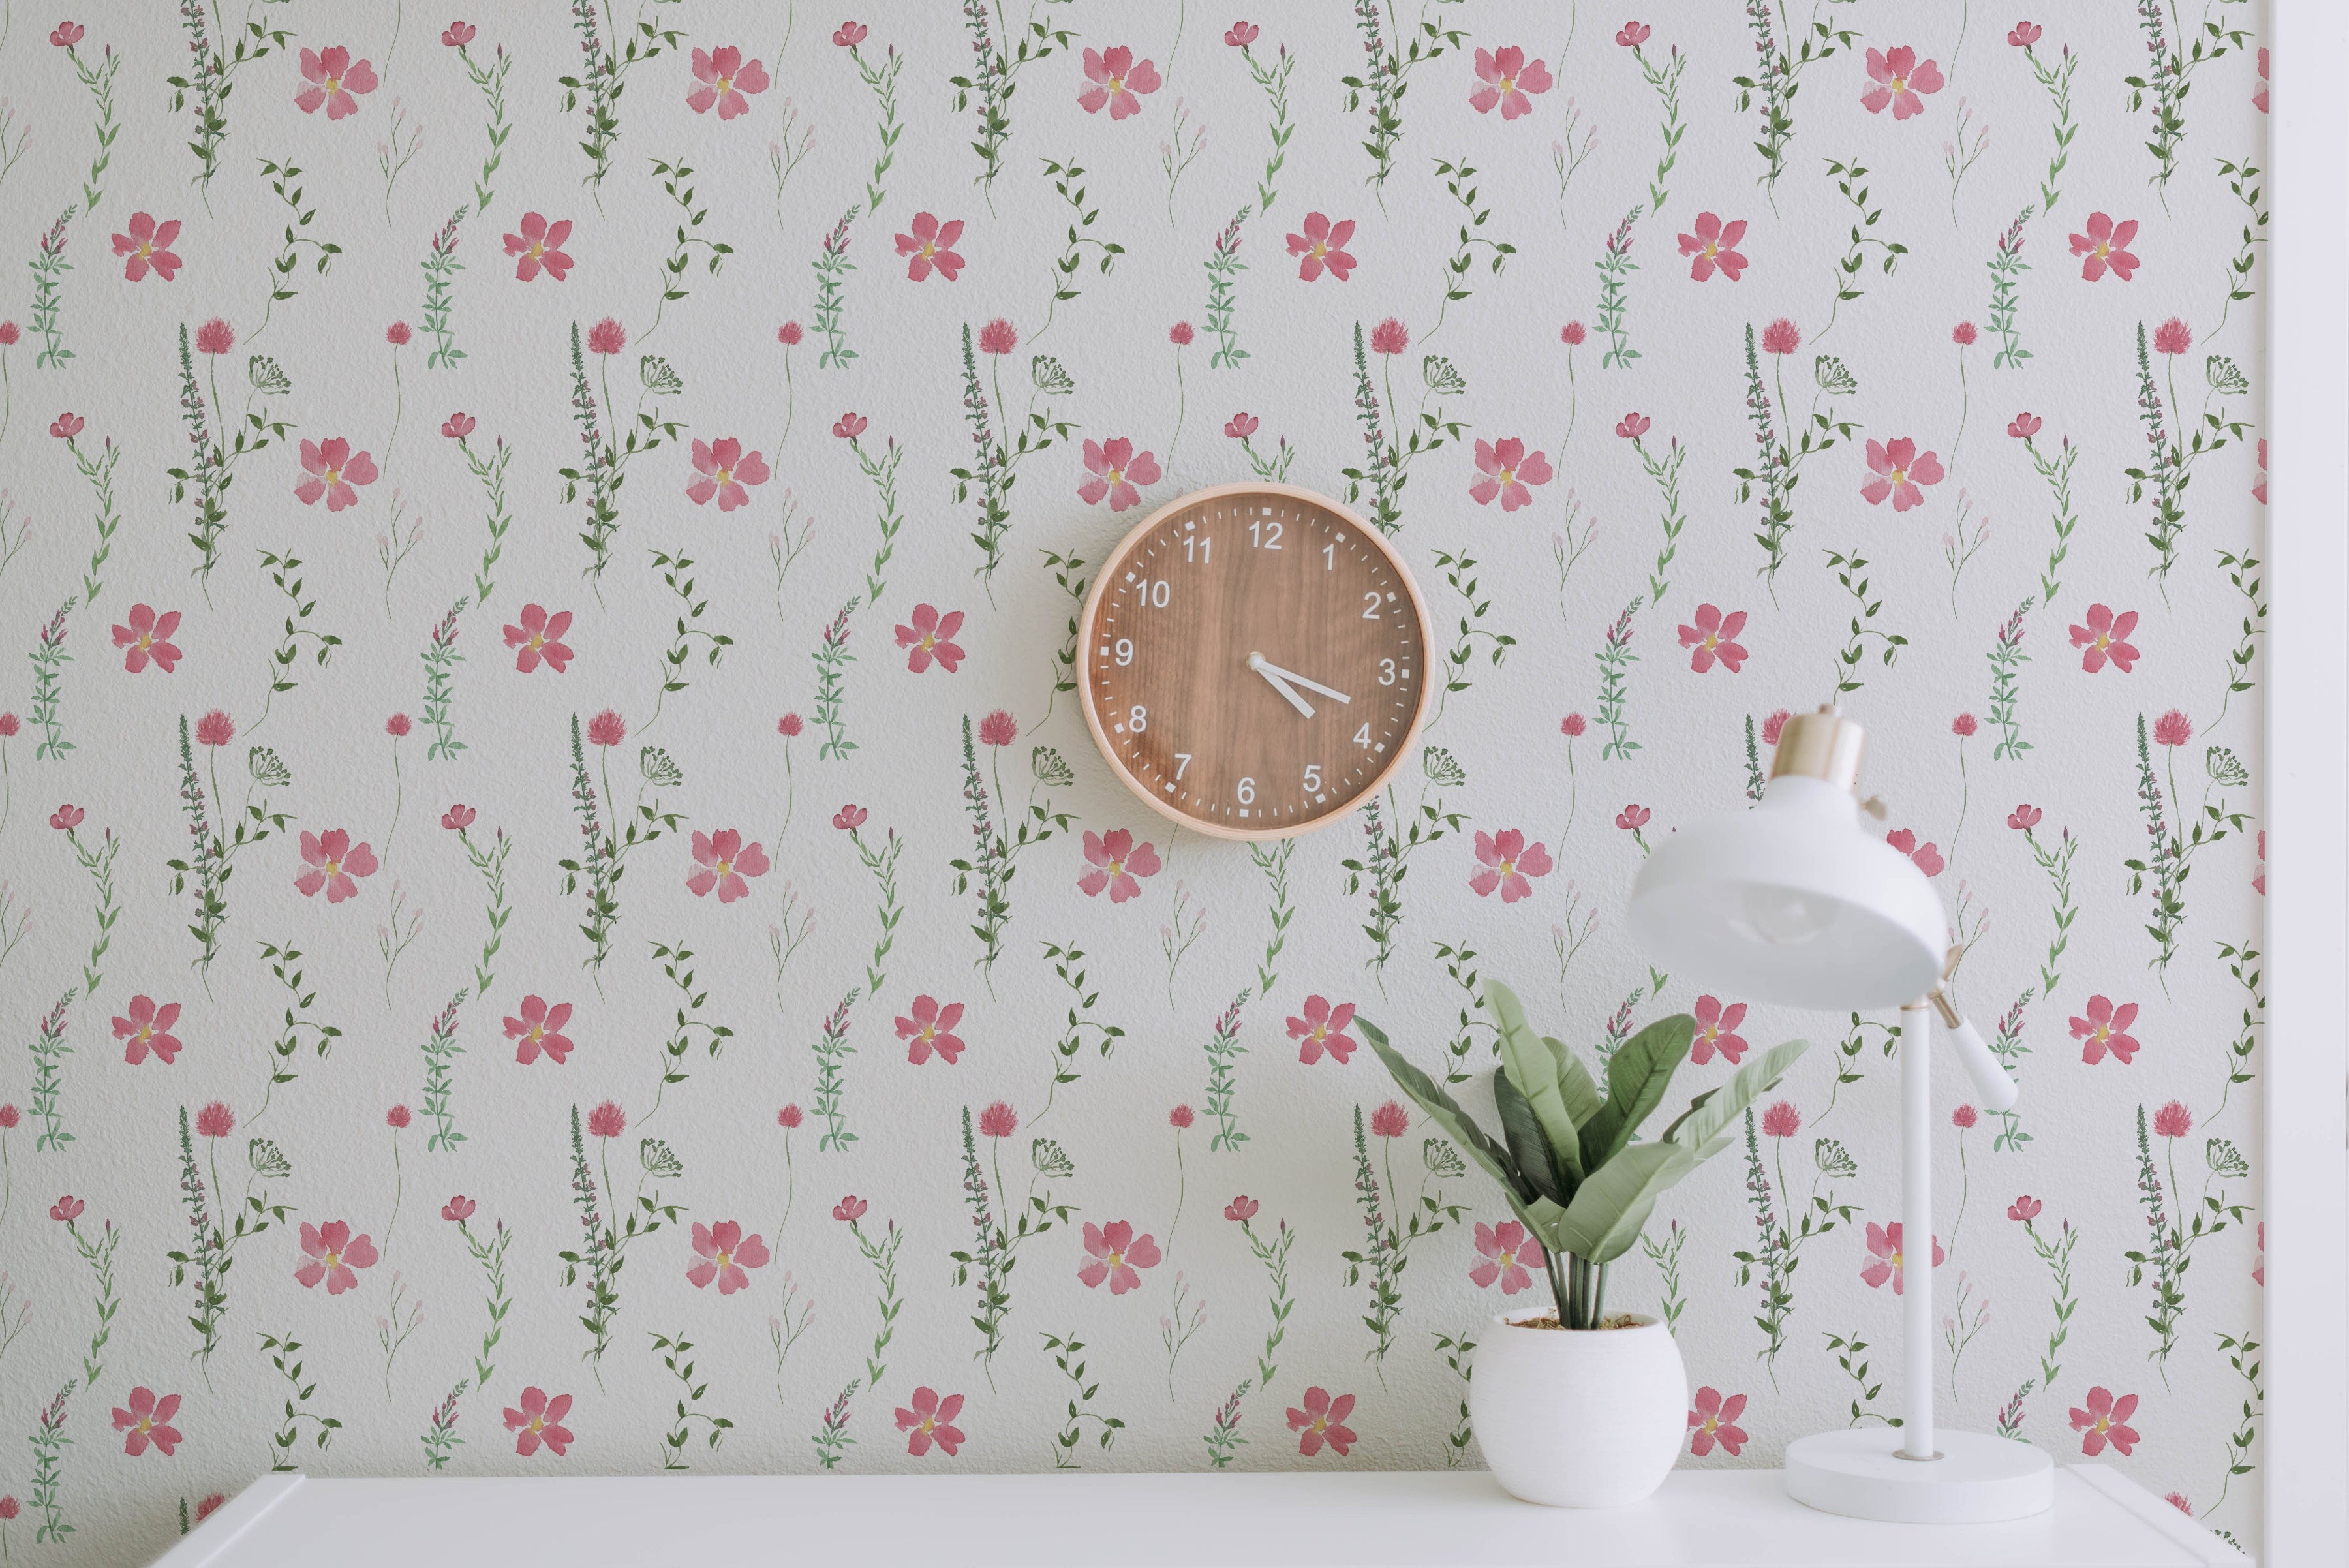 A room with a Spring Serenity Wallpaper featuring a white background adorned with delicate pink flowers and green leaves, complemented by a wooden wall clock and a white desk lamp on a desk with a small potted plant